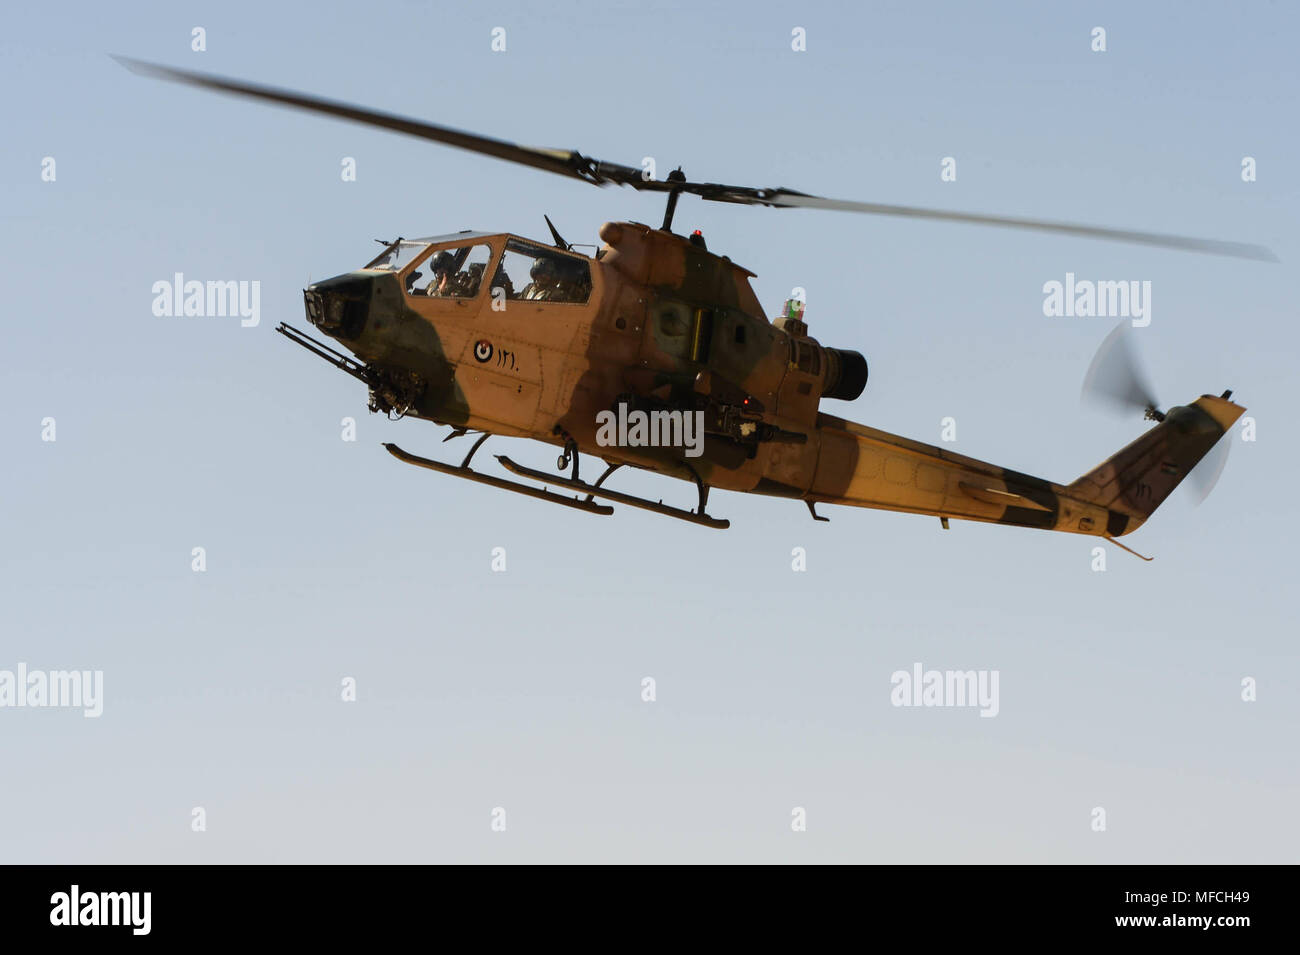 A Jordanian Armed Forces AH-1 Cobra participate in Exercise Eager Lion 18.  Eager Lion is a major exercise with the Hashemite Kingdom of Jordan,  designed to exchange military expertise and improve interoperability